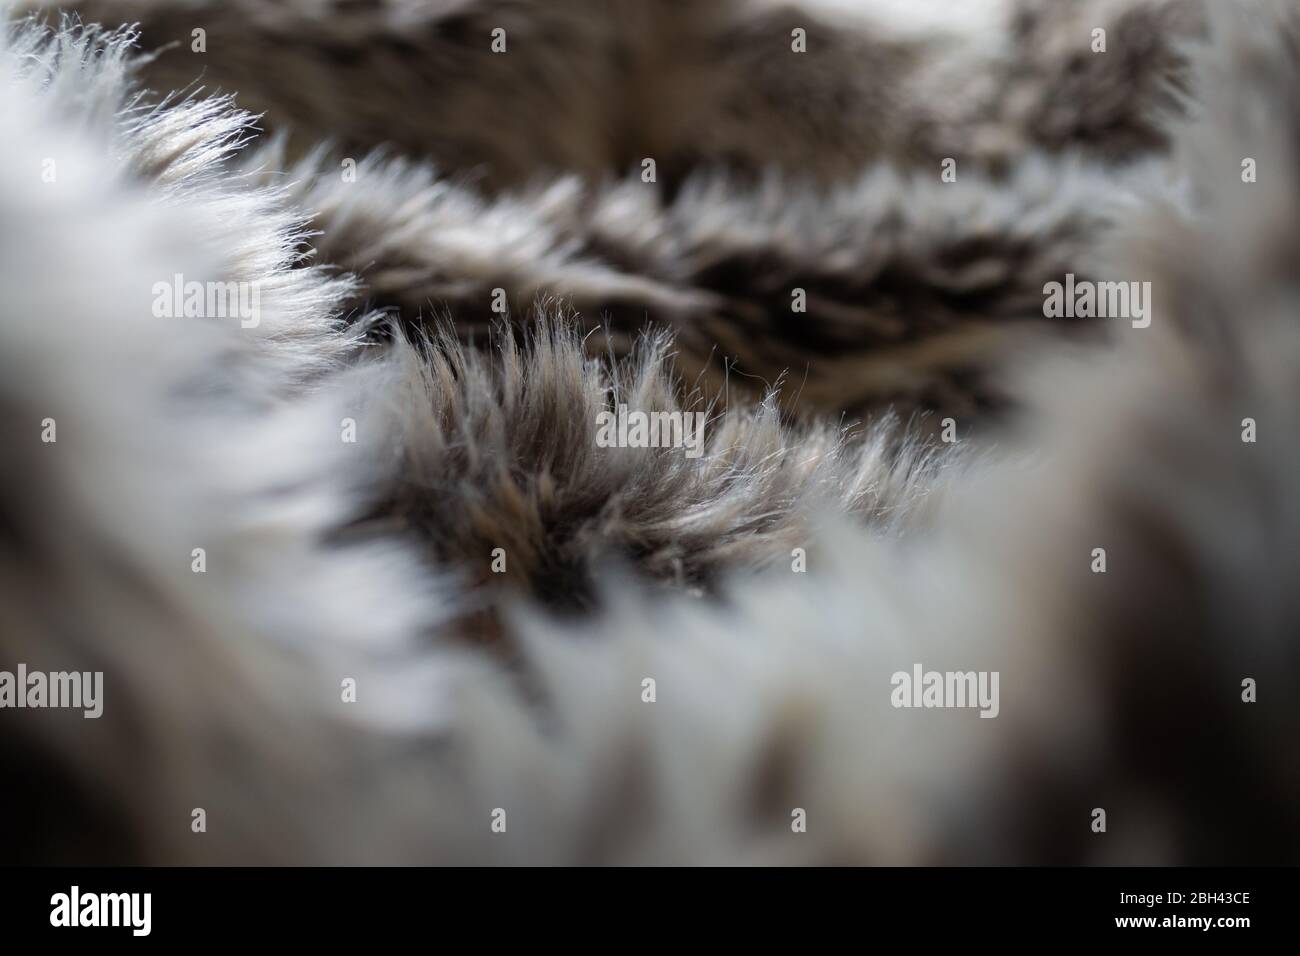 Looking through a faux fur blanket with brown, white and grey colours Stock Photo